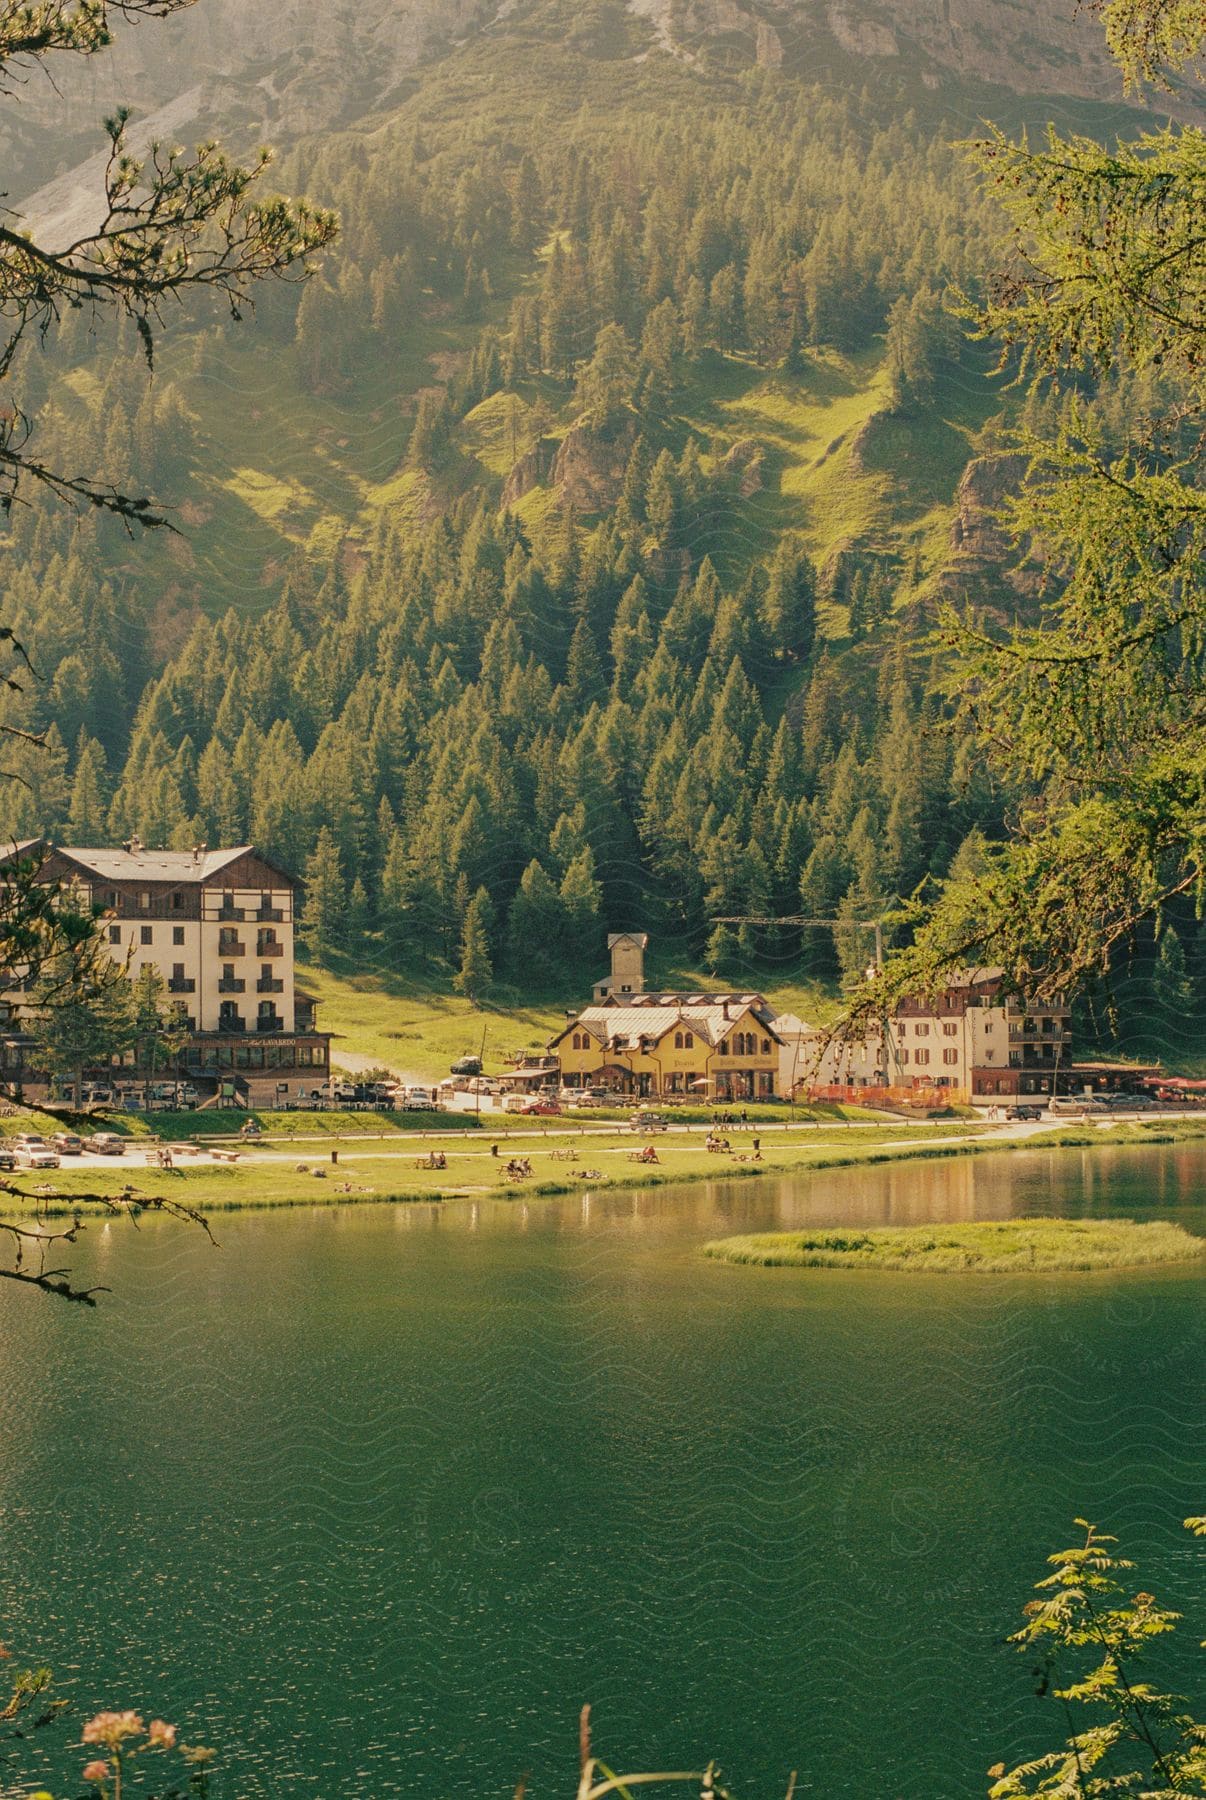 Greenish lake surrounded by mountains with vegetation and rustic buildings on the shore.